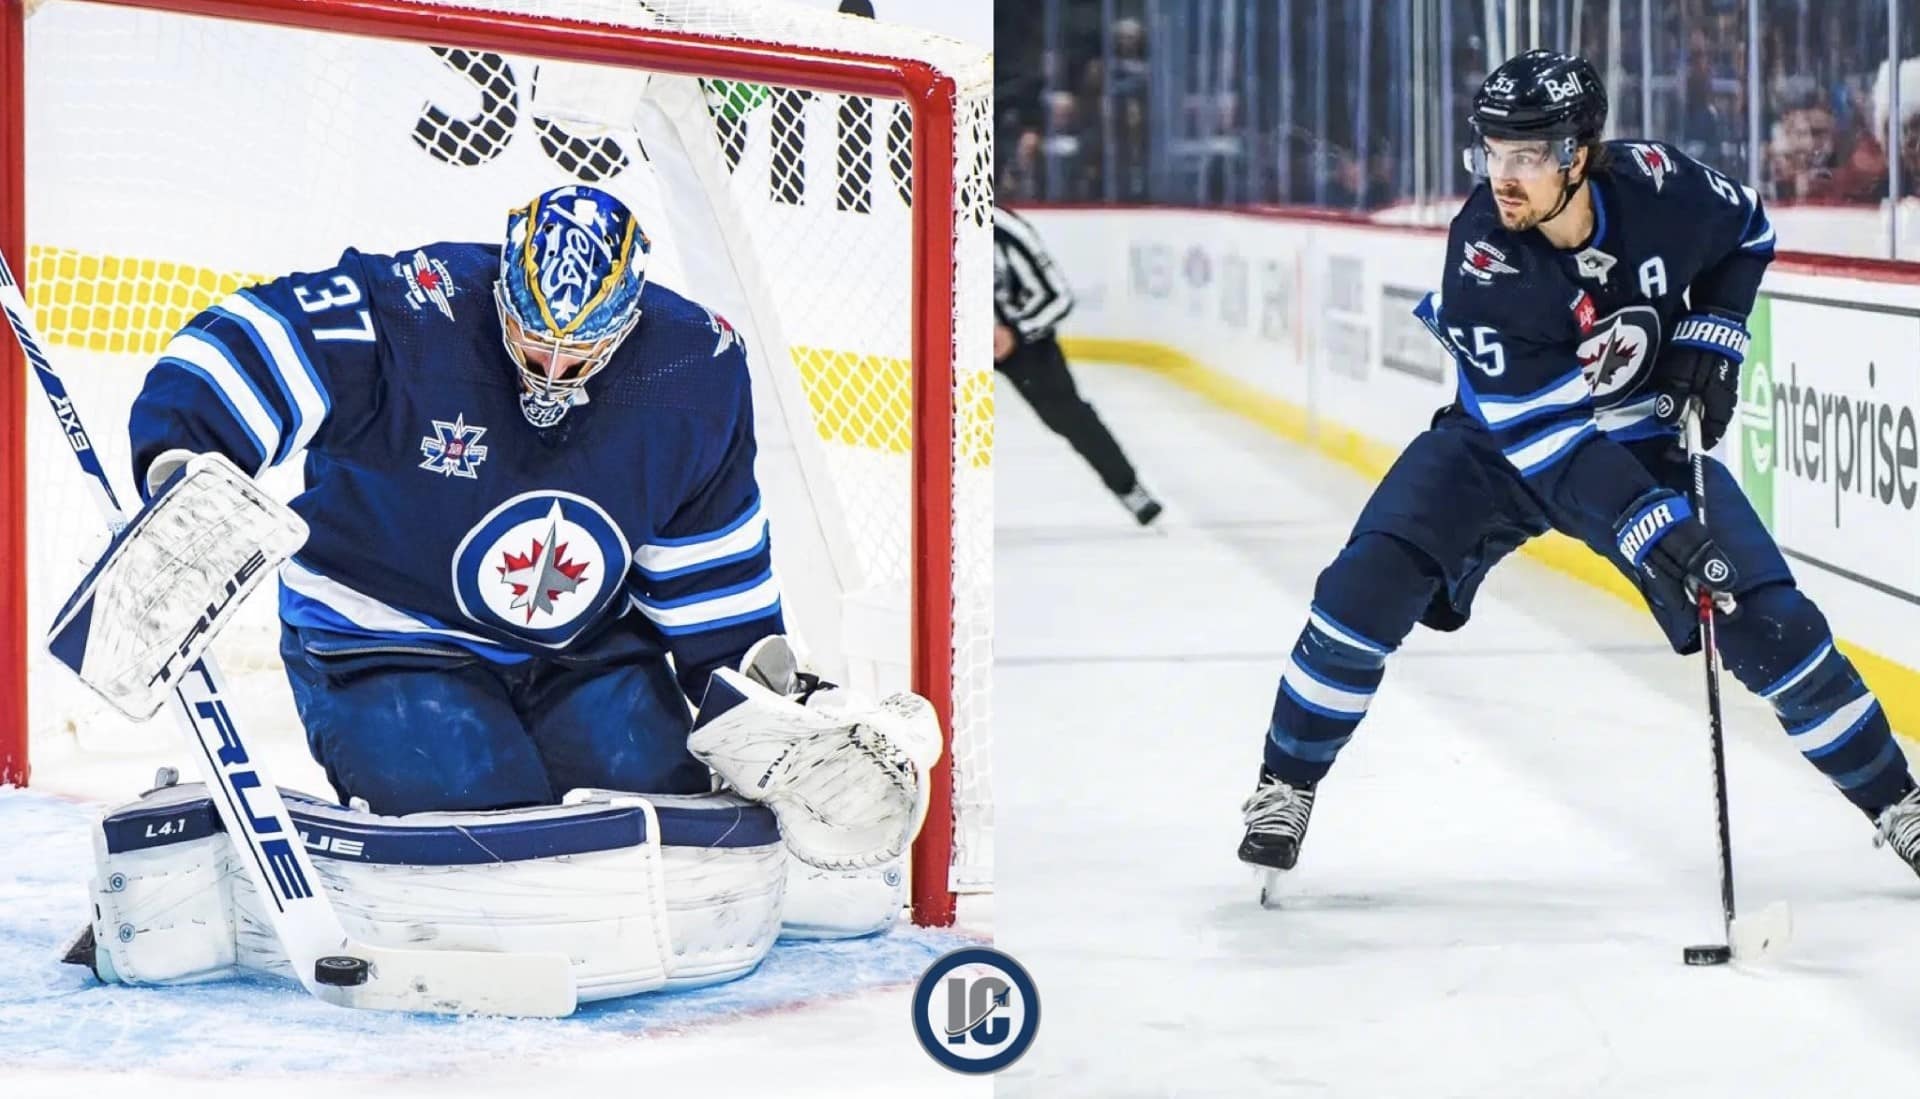 Jets netminder Hellebuyck shares details of brush with COVID as Winnipeg  players now 100% vaccinated